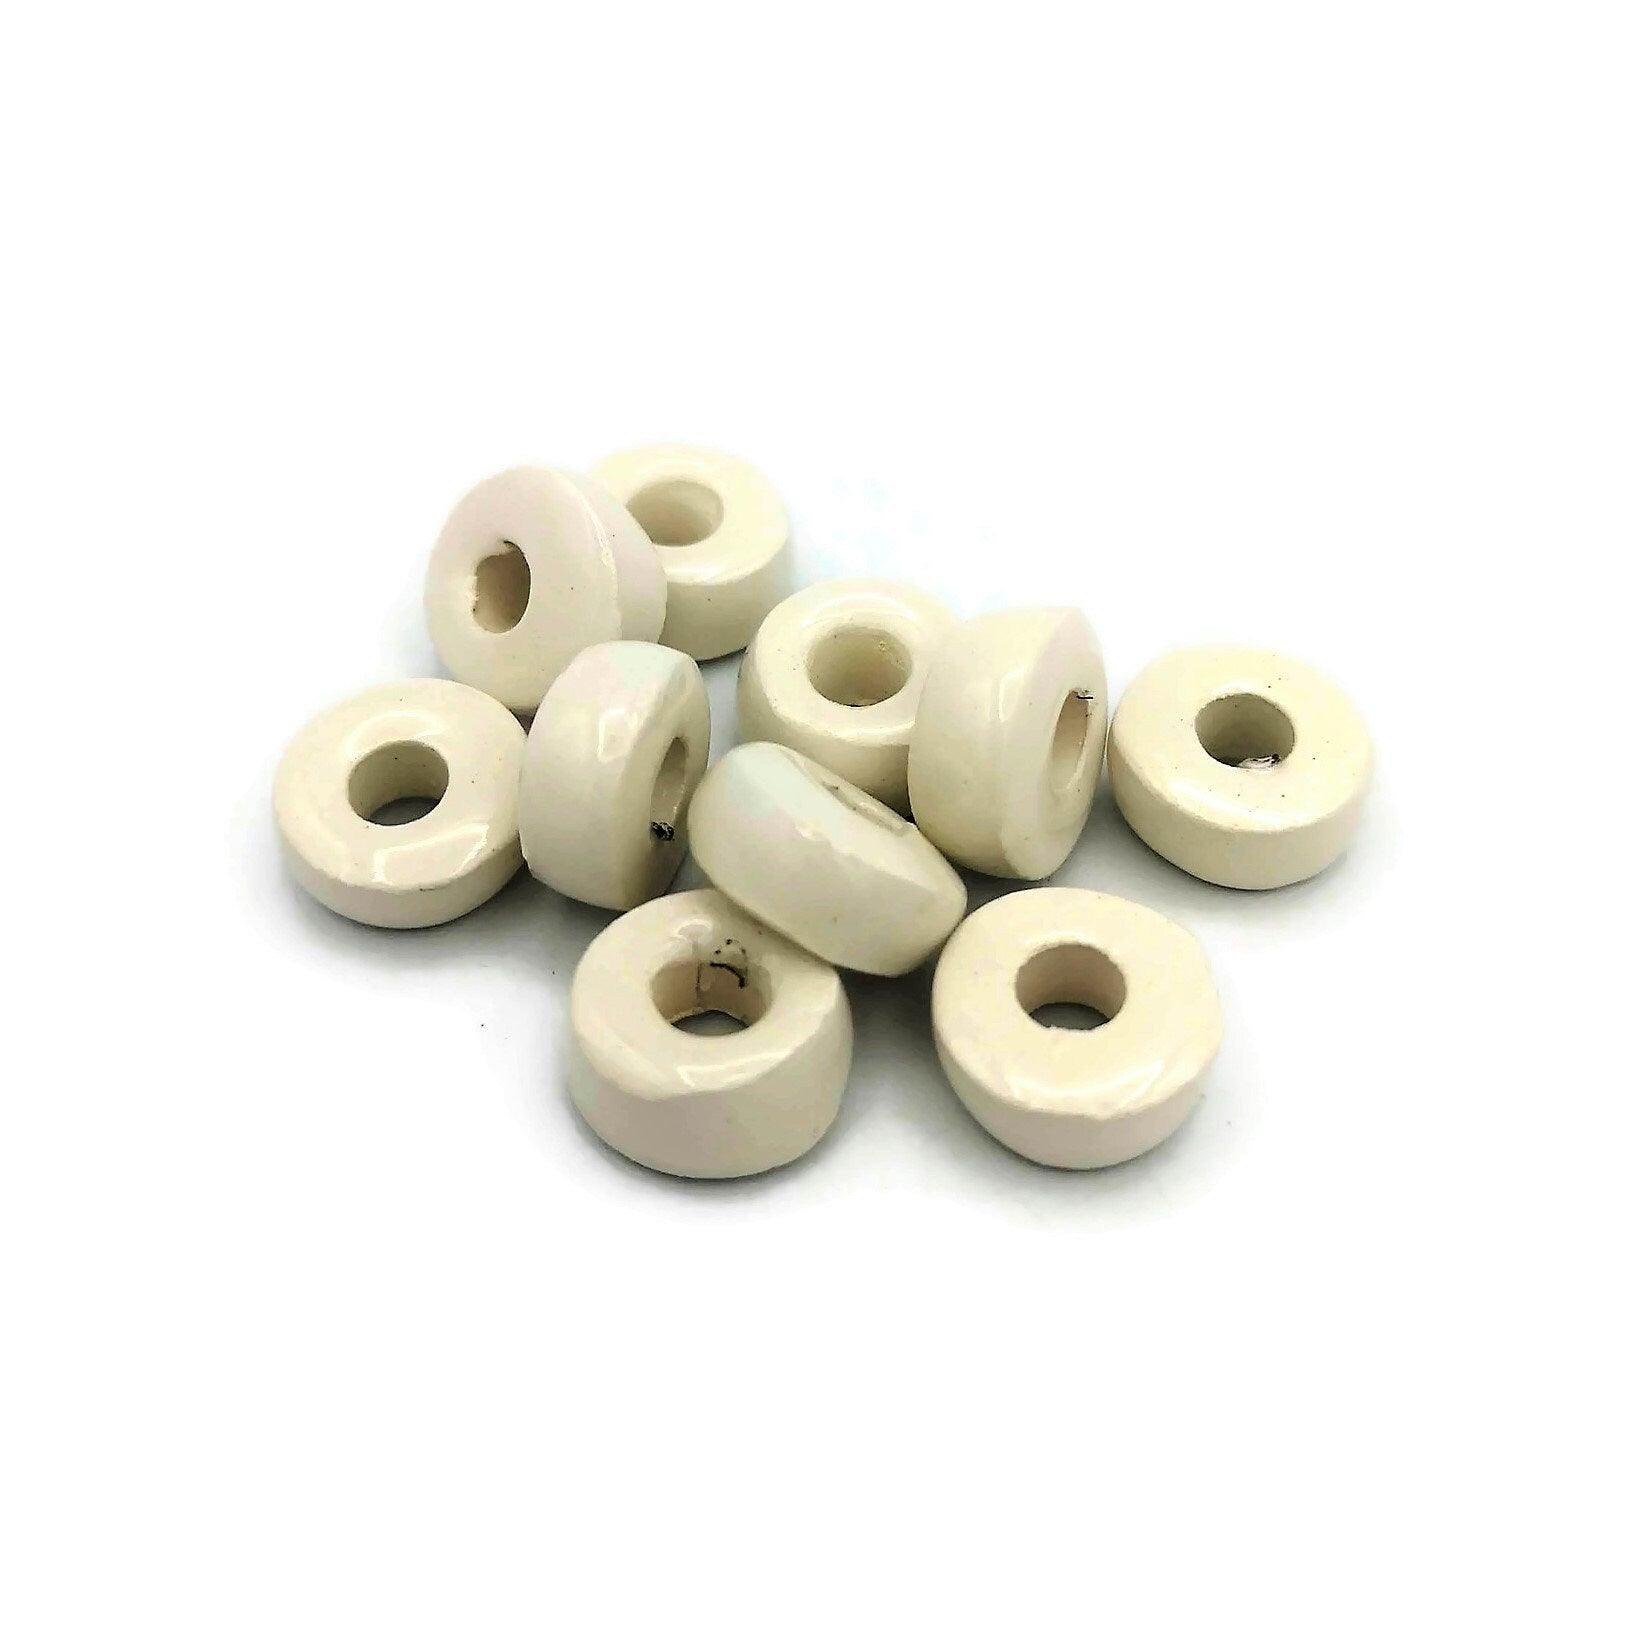 10Pc Ceramic Macrame Beads With Large Hole For Jewelry Making, Coral Pink Clay Tube Beads for Bracelets, Dreadlock Beads Braid Accessories - Ceramica Ana Rafael